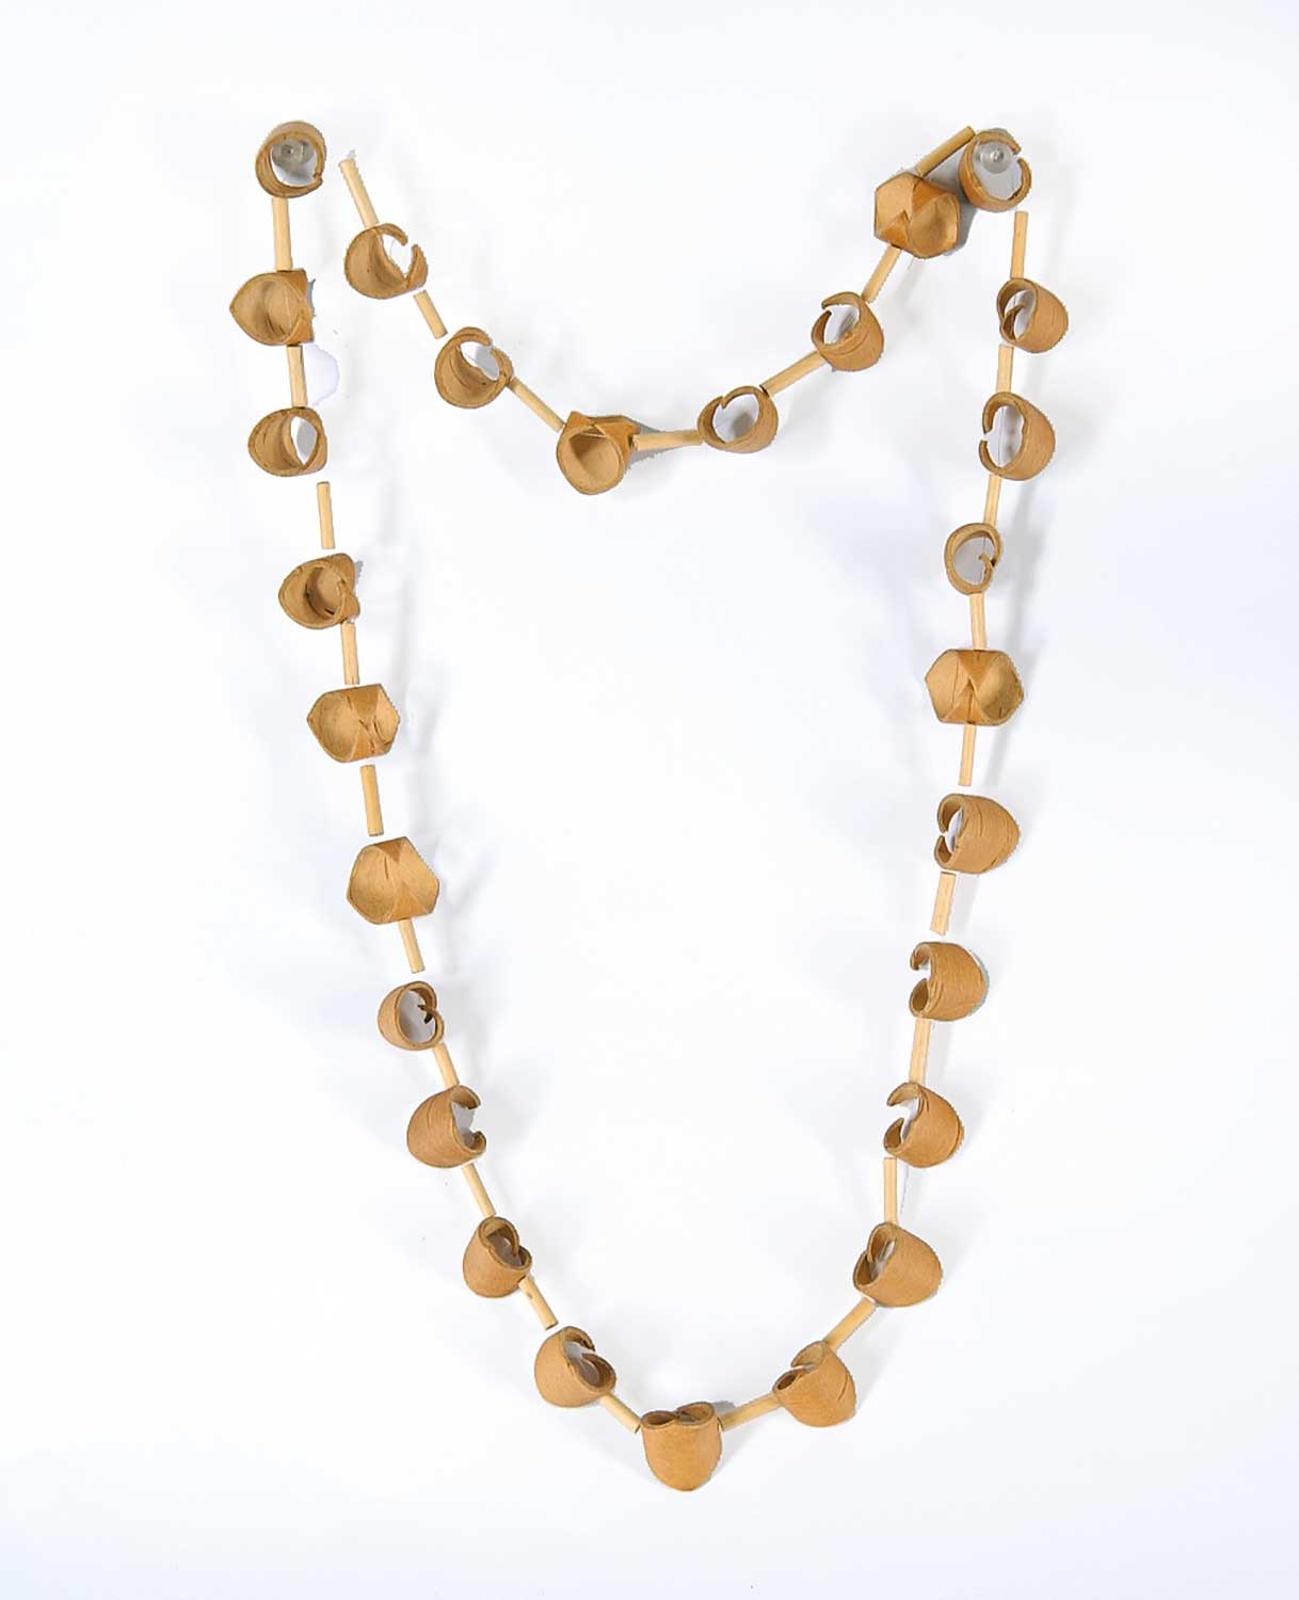 Robert Charles Aller (1922-2008) - Untitled - Curled Birch Bark Necklace with Birch Beads on Moose Hide